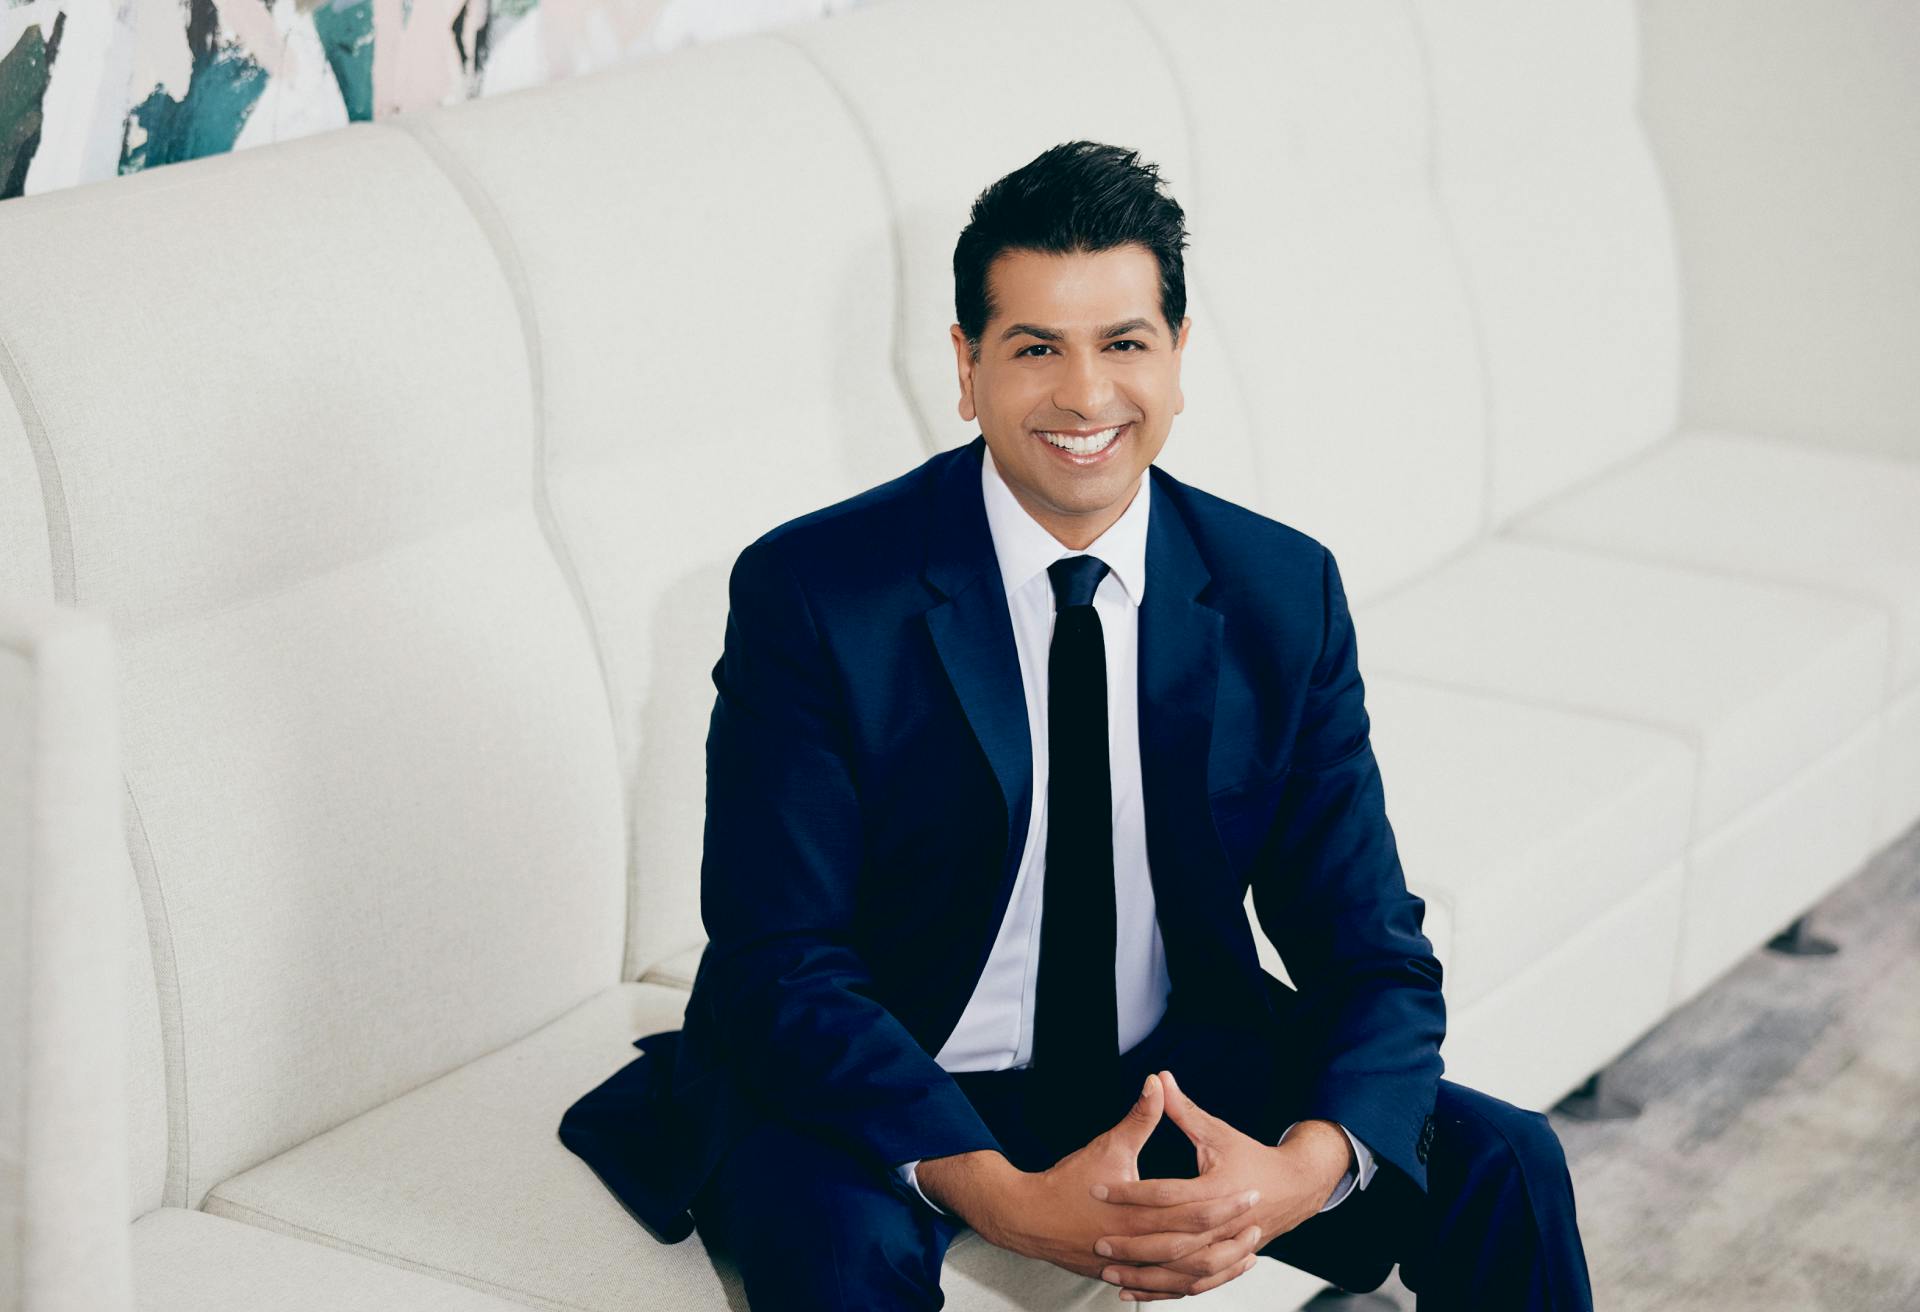 Dr. Neil Tanna in a suit sitting on a white couch